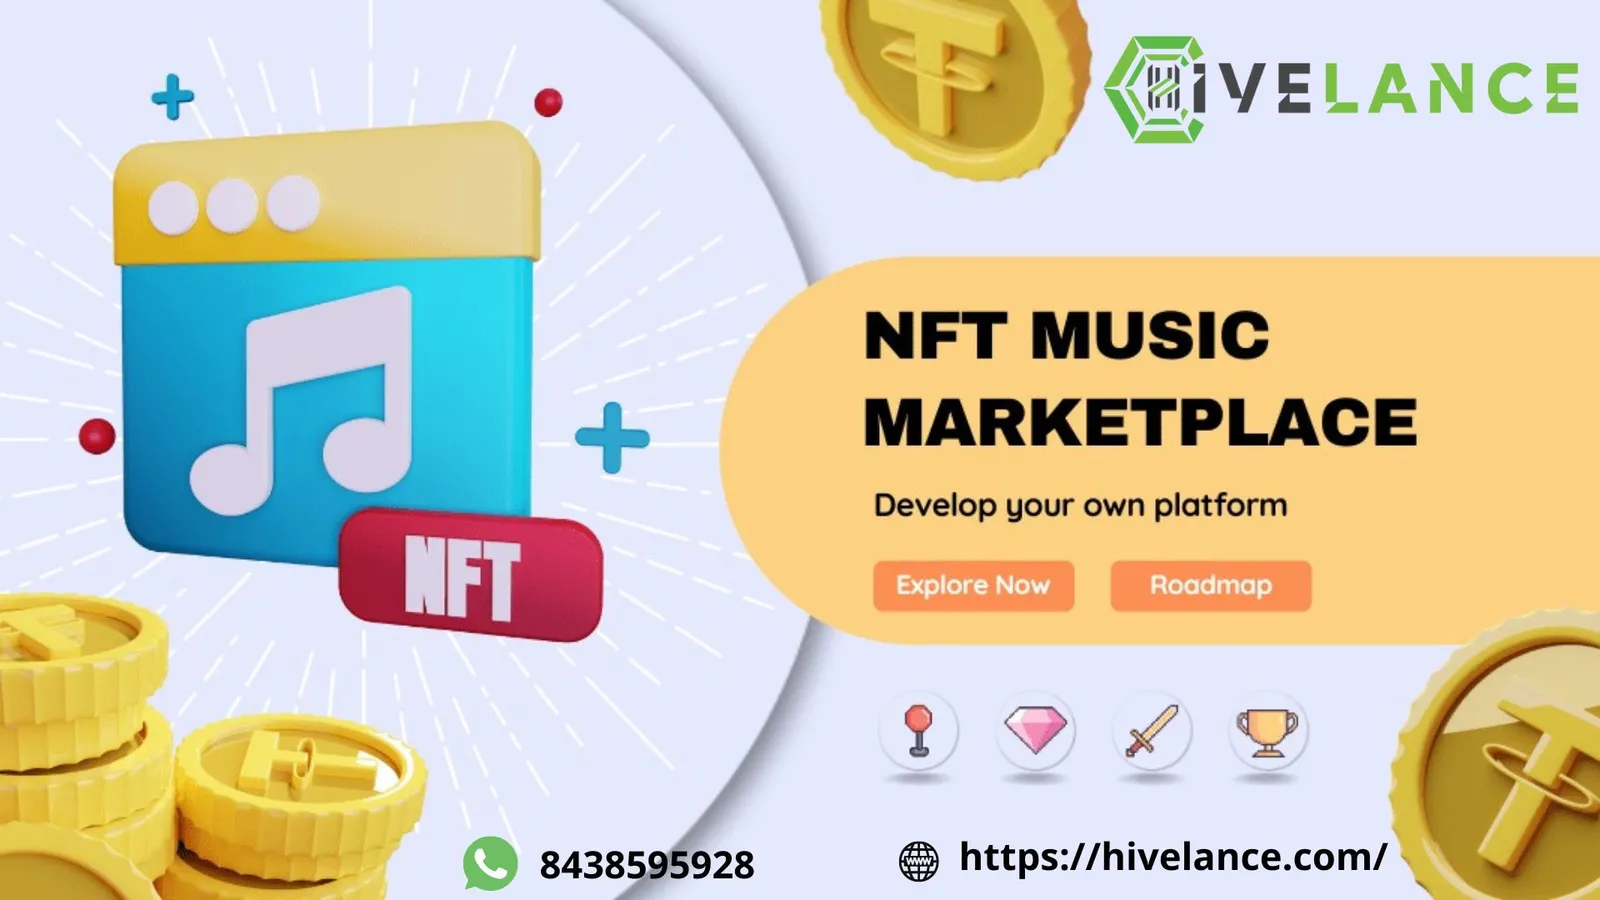 To Create Music NFT Marketplace For Your Fans